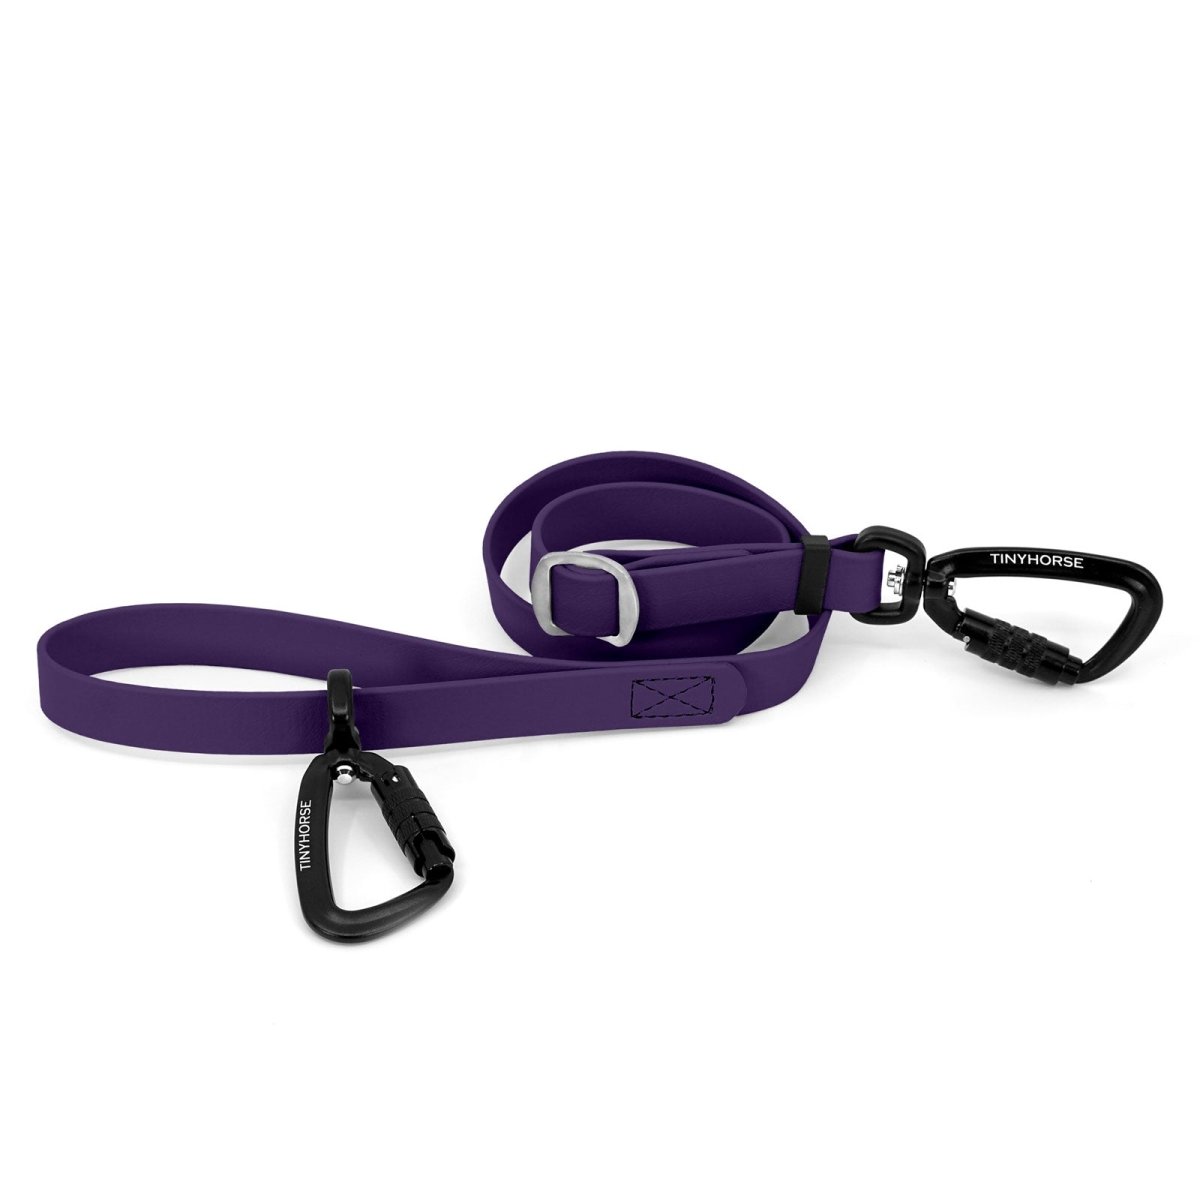 An adjustable purple-coloured Lead-All Pro made of BioThane with 2 auto-locking carabiners